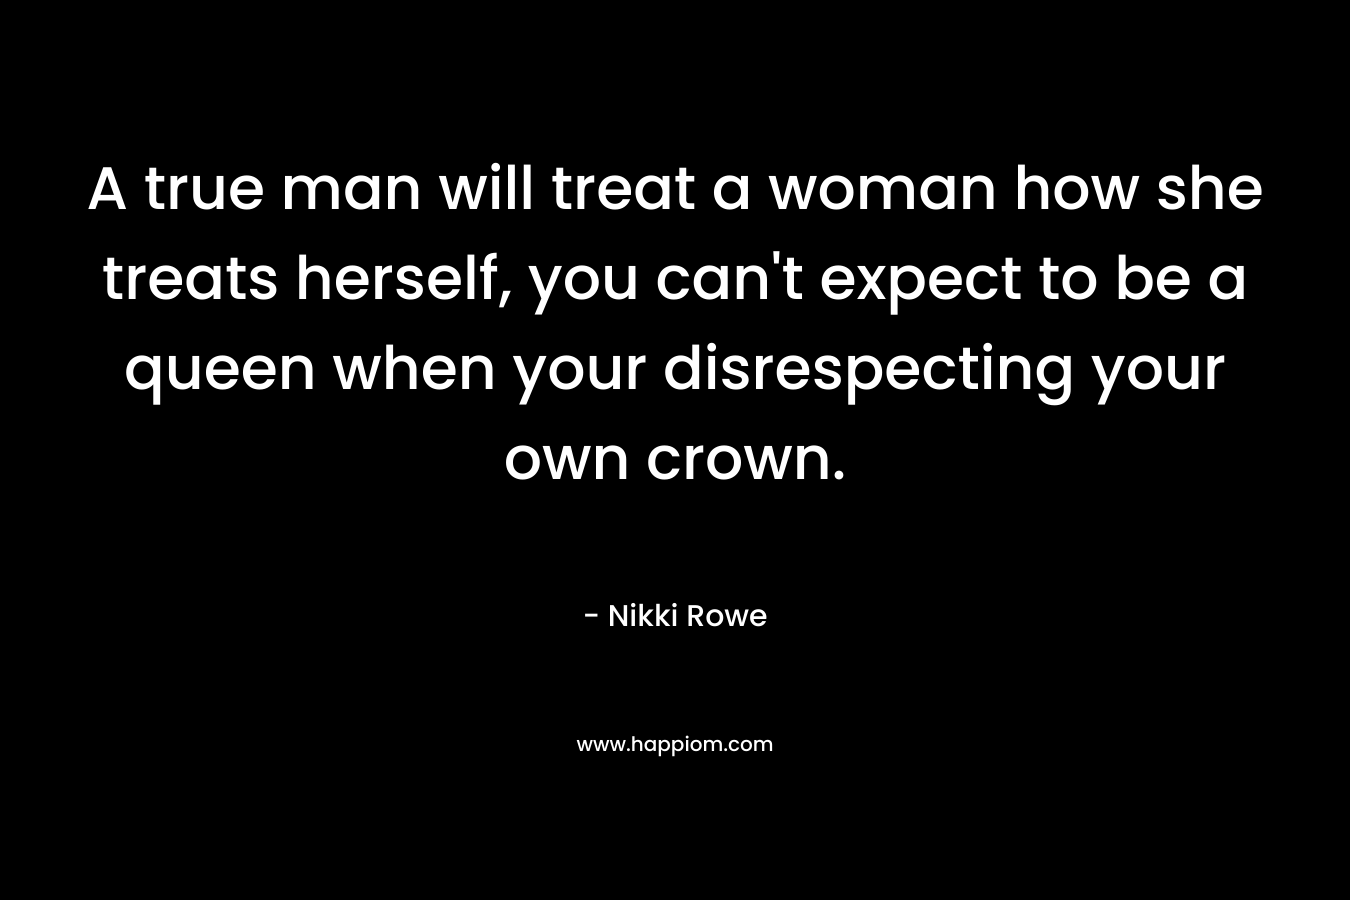 A true man will treat a woman how she treats herself, you can't expect to be a queen when your disrespecting your own crown.